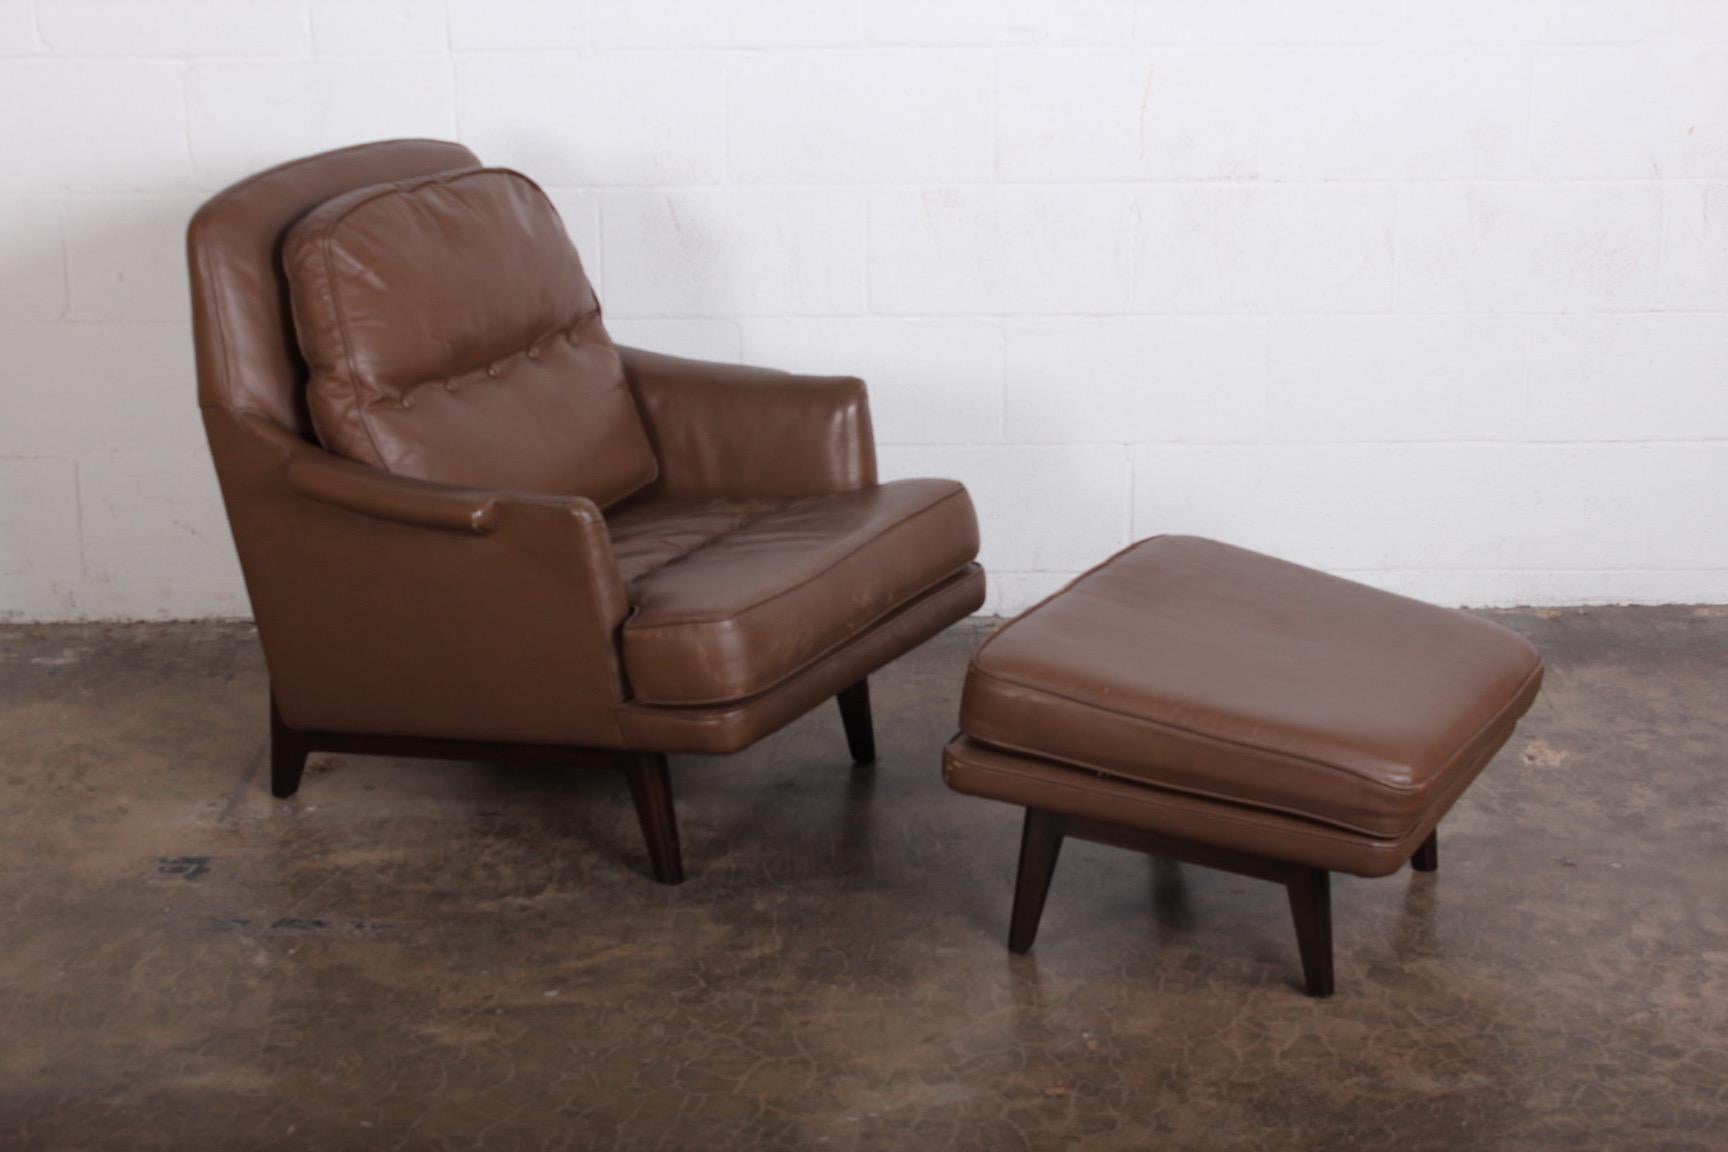 A Dunbar lounge chair and ottoman model 484 designed by Roger Sprunger. Mahogany frame with original leather.